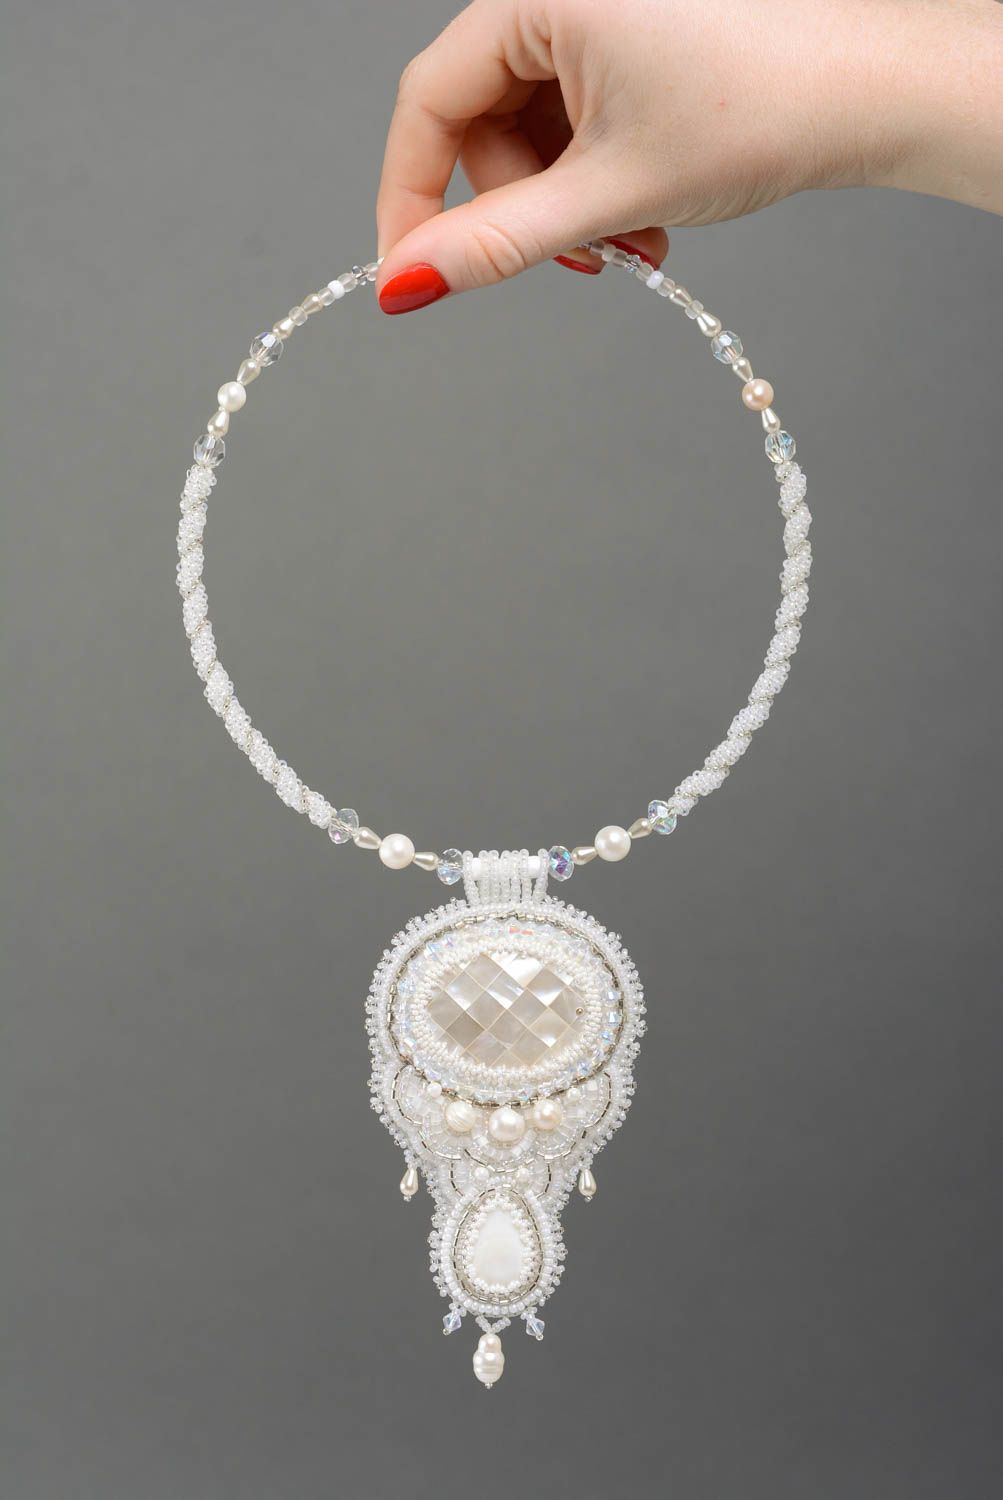 Handmade necklace made of beads and pearls elegant beautiful delicate white jewelry photo 4